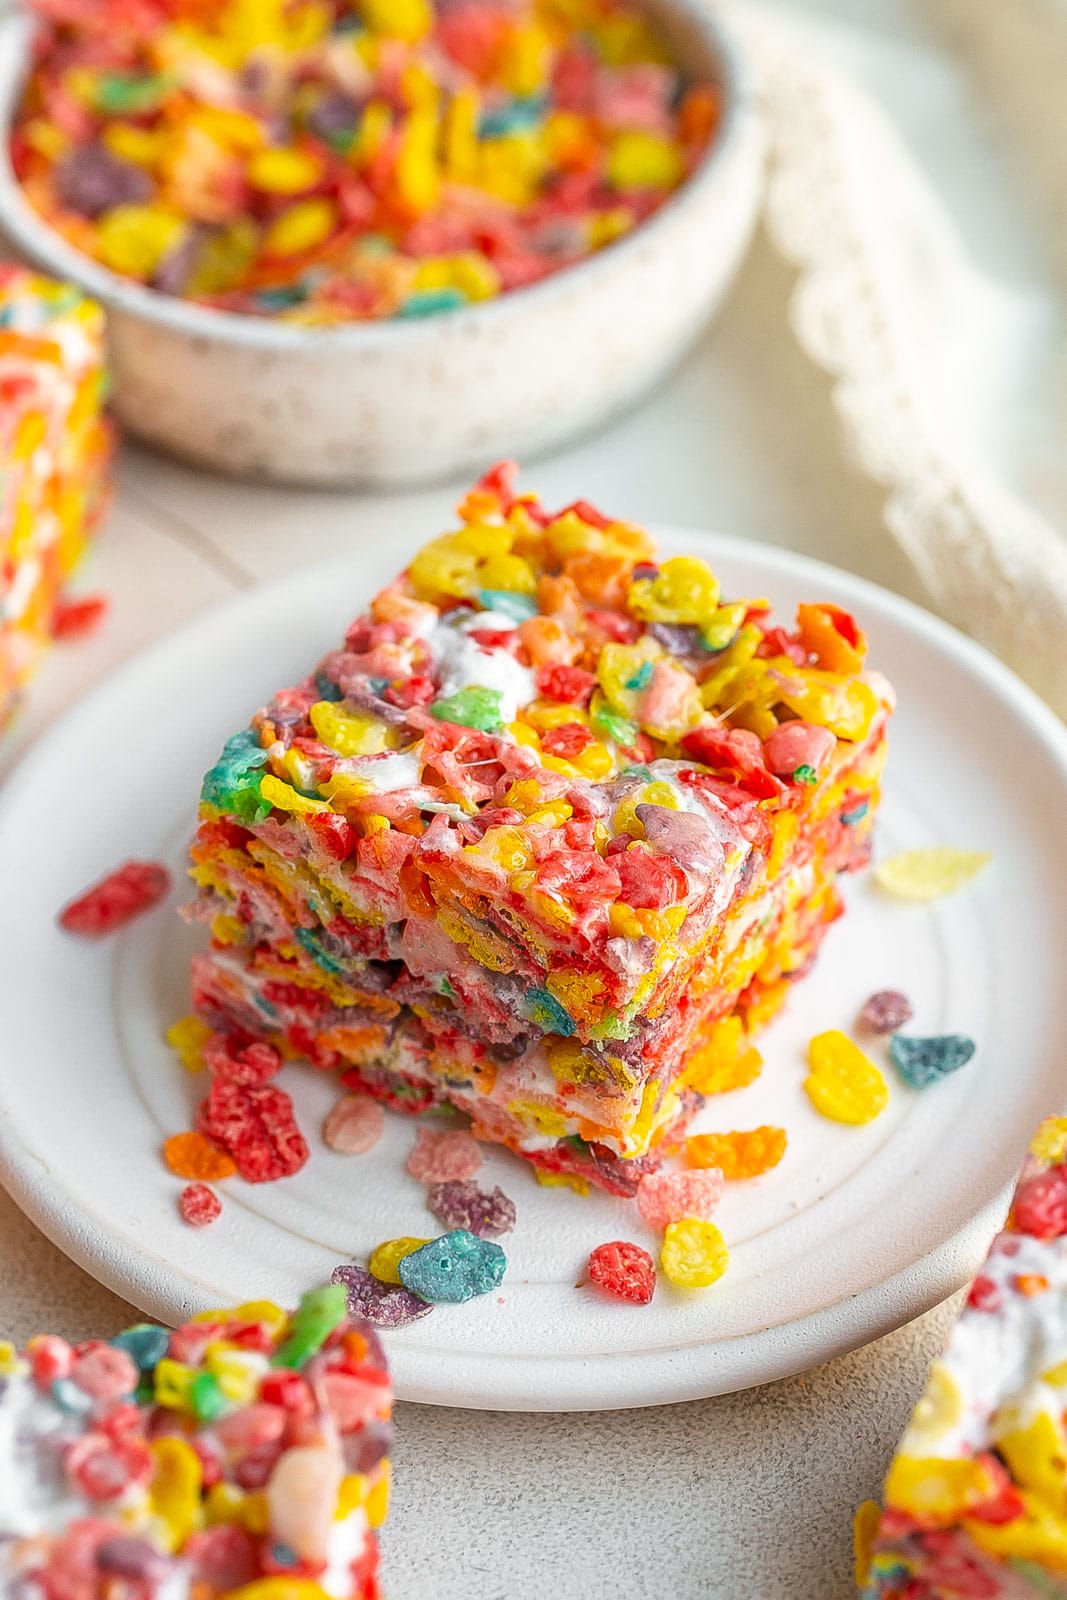 Fruity Pebbles Marshmallow Treats
on a white plate.